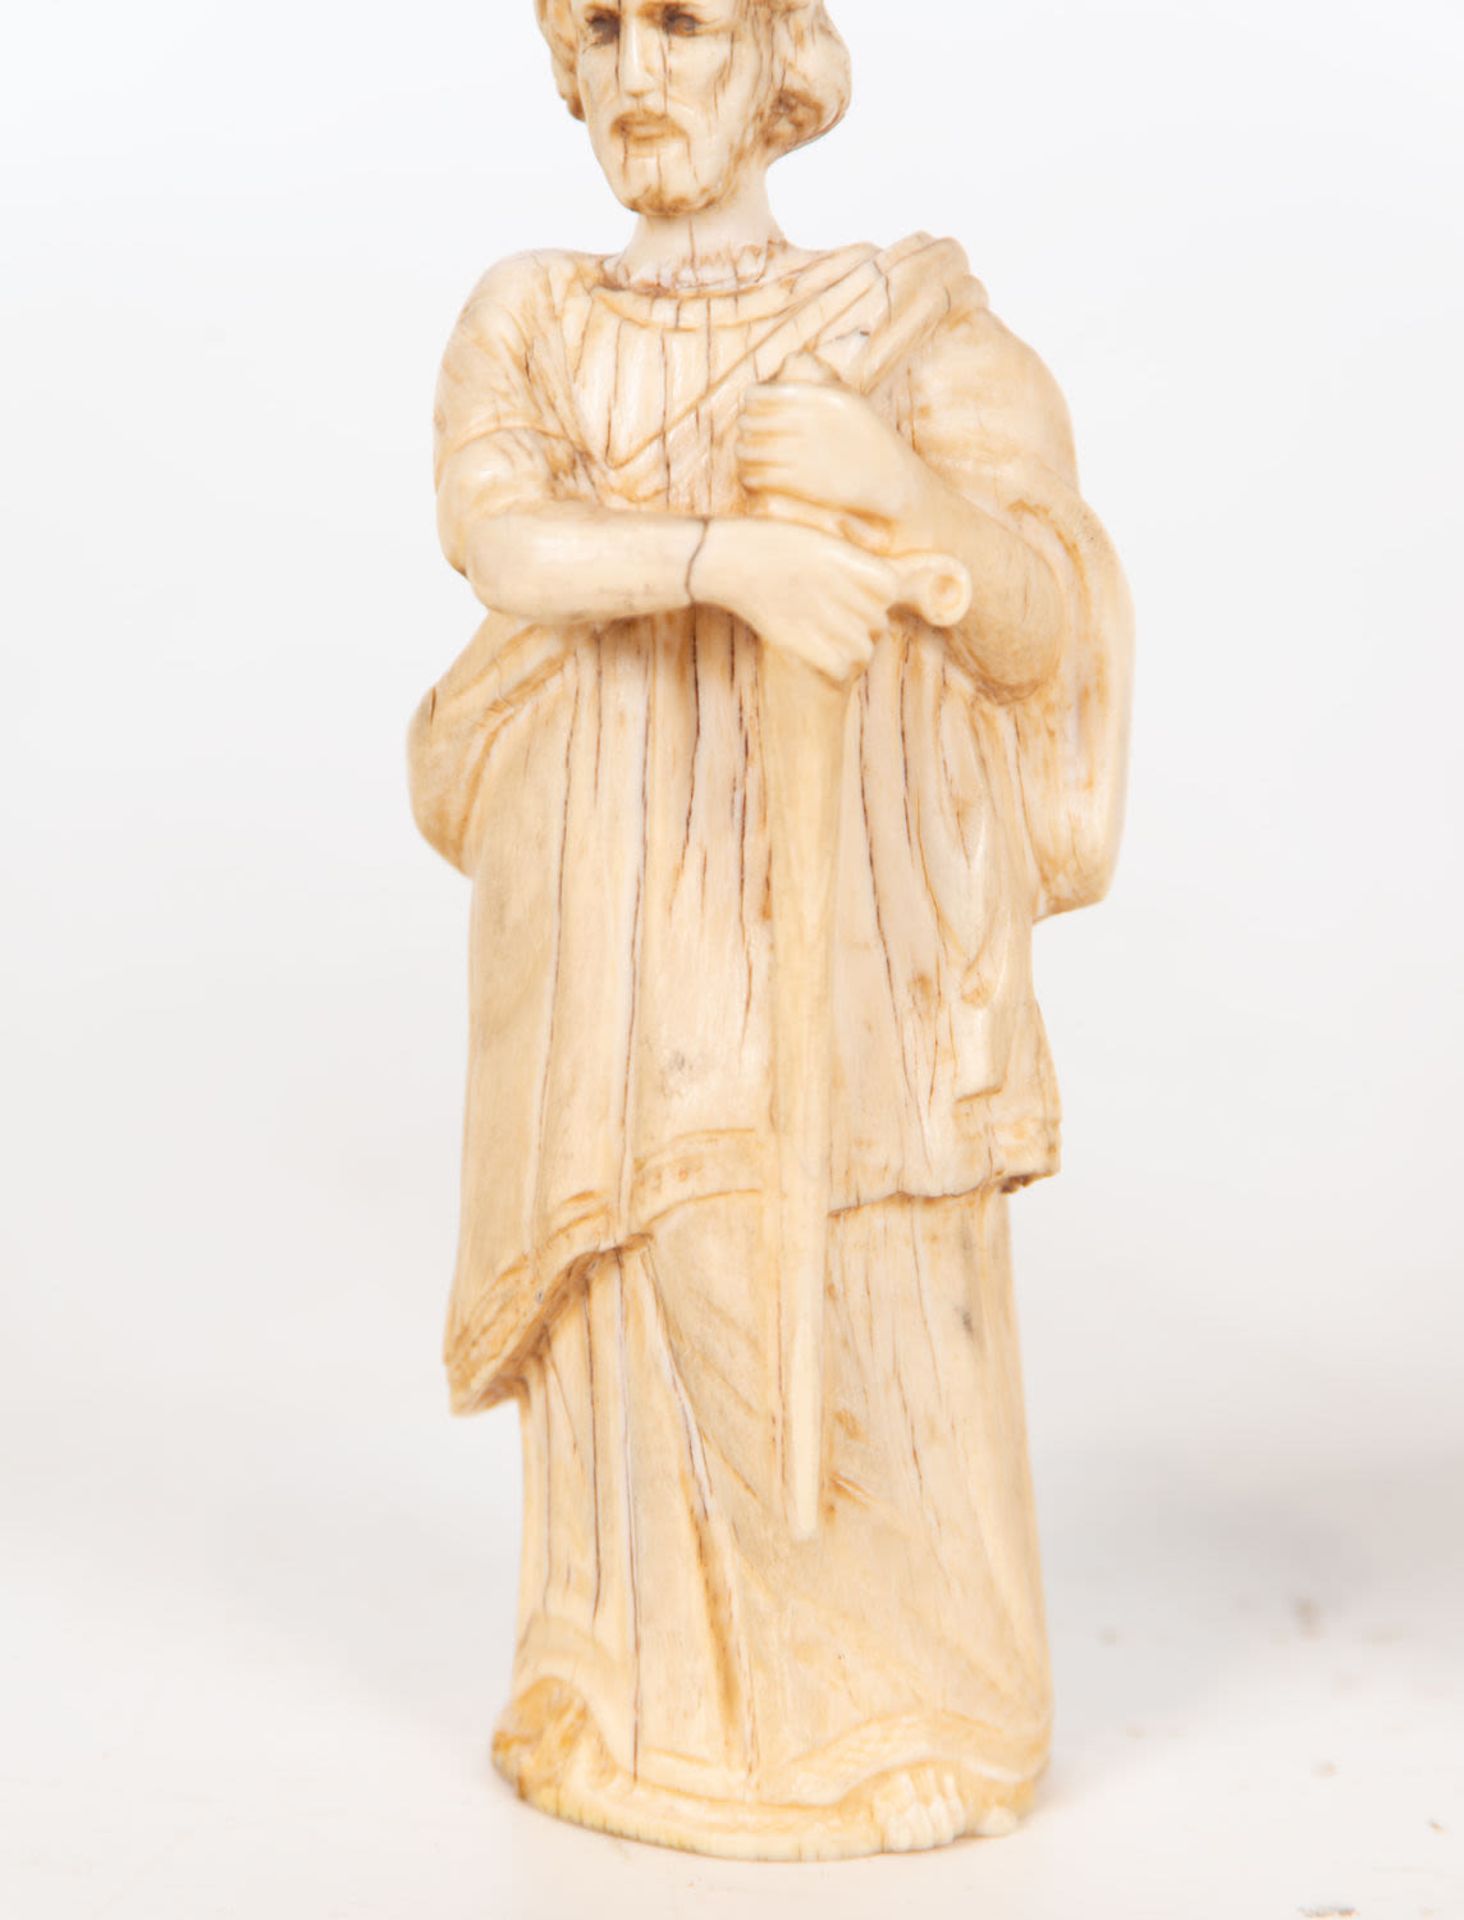 Saint Peter and Saint Paul in Ivory, Central European School, 17th century - Image 7 of 8